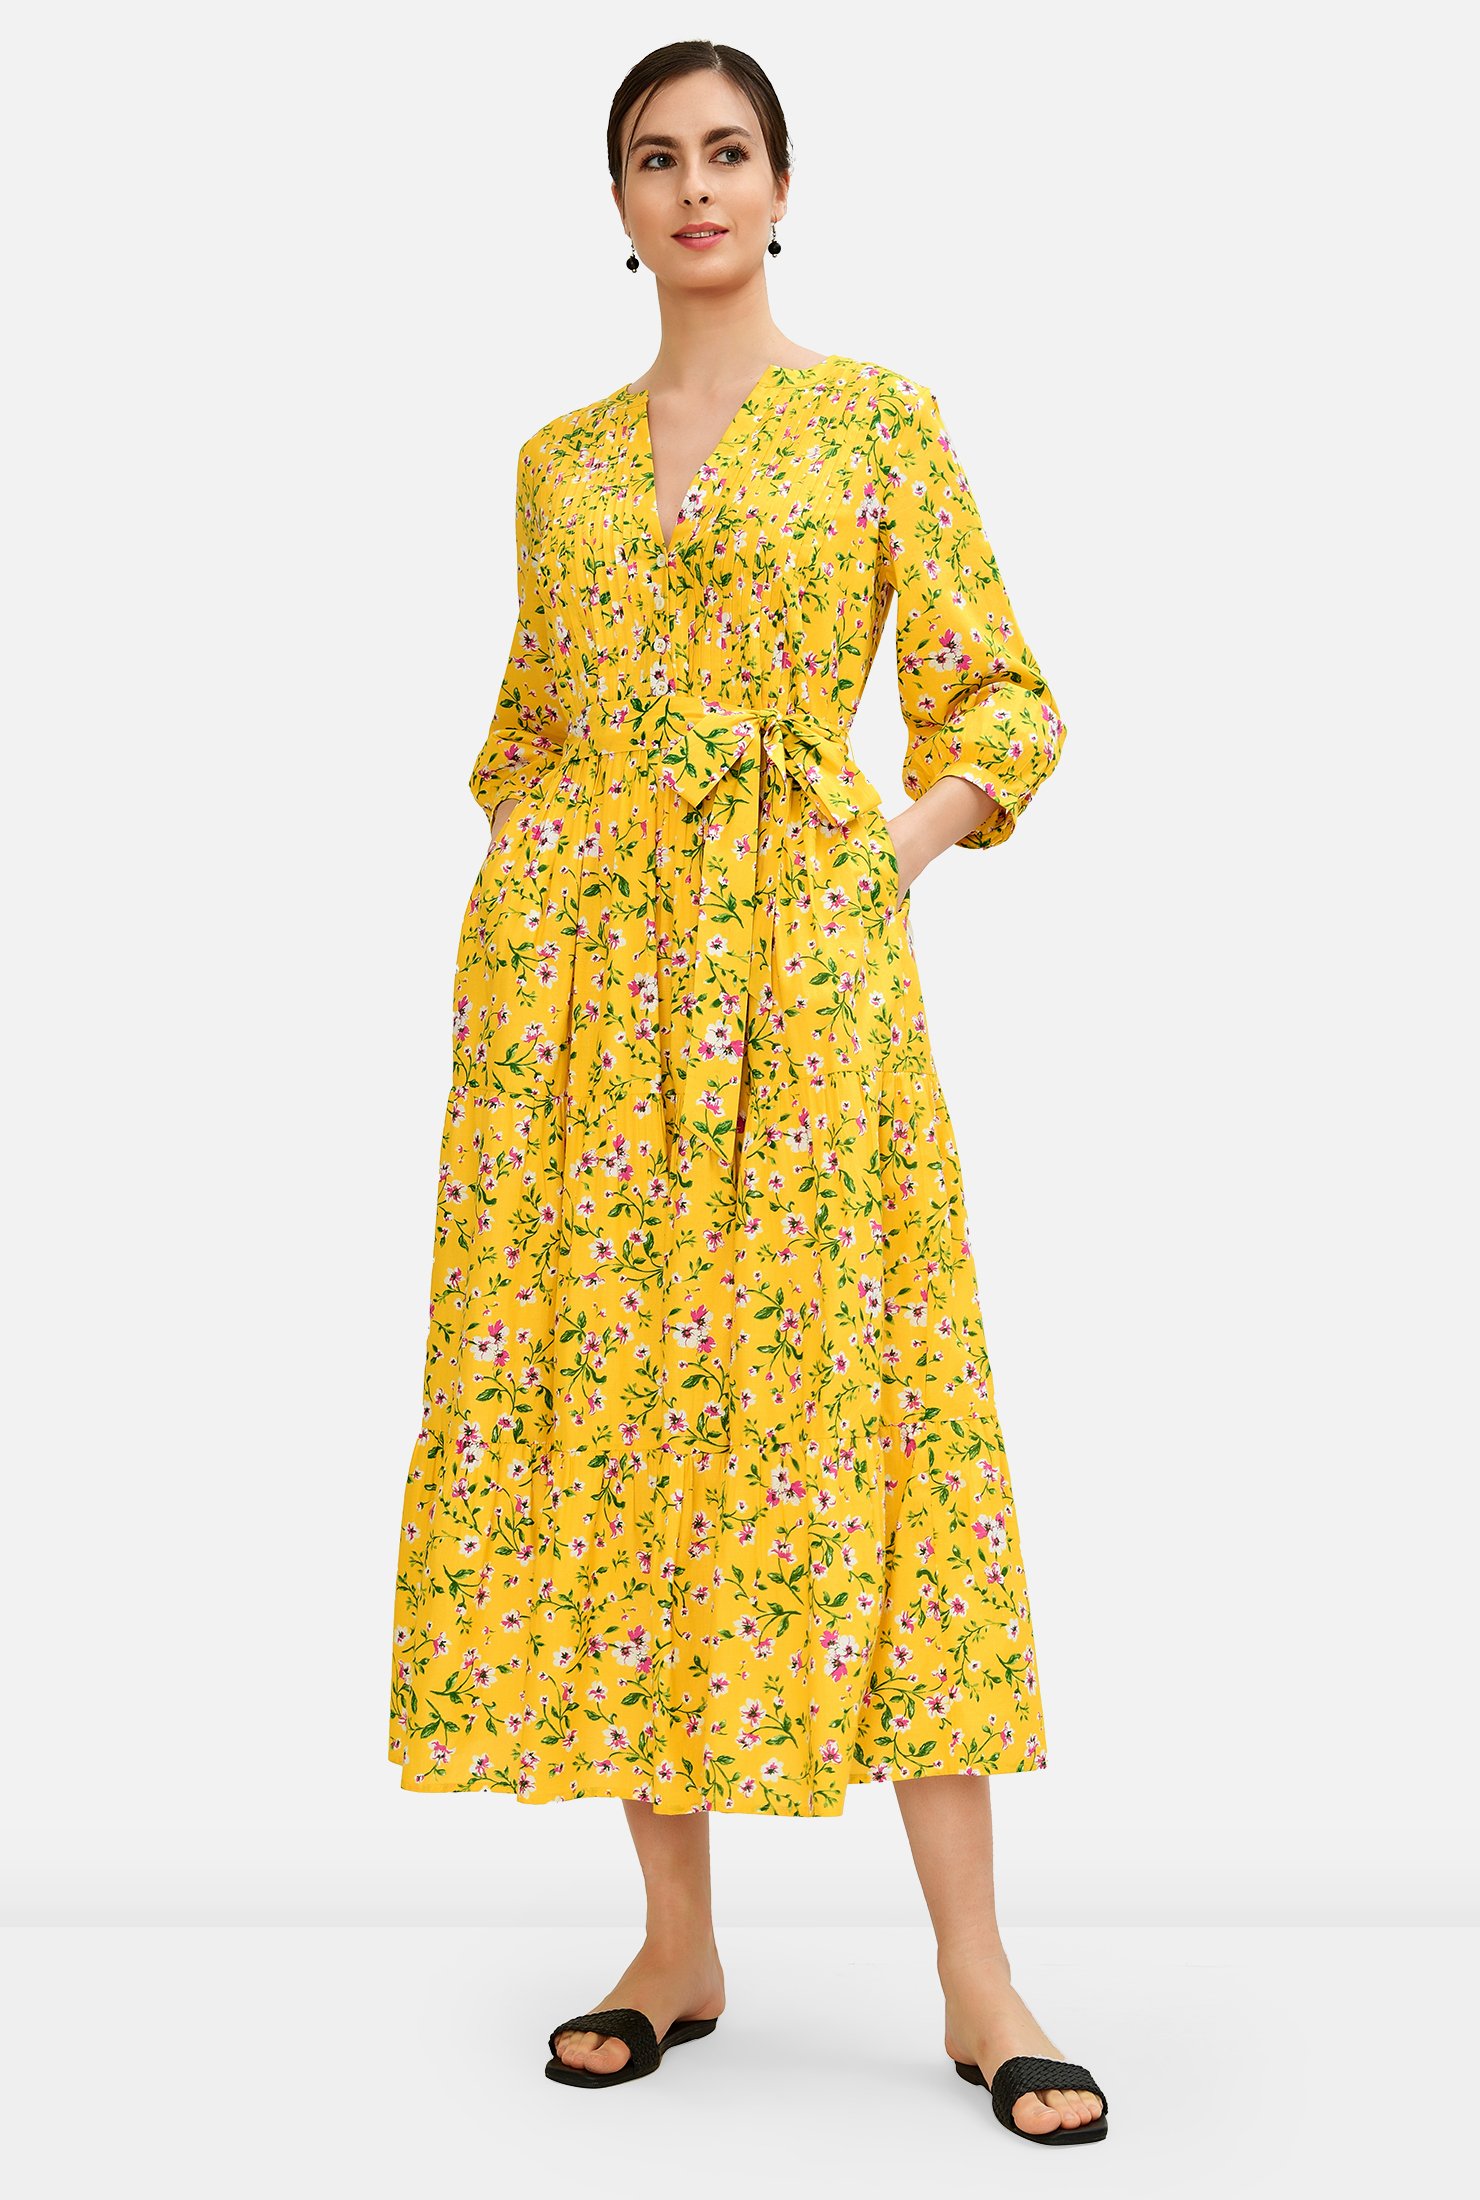 Our light and lovely cotton cambric dress with a sun-drenched floral print and an airy silhouette features a pintuck-pleat front bodice, swingy ruched tier full skirt and an optional self-sash-tie belt.